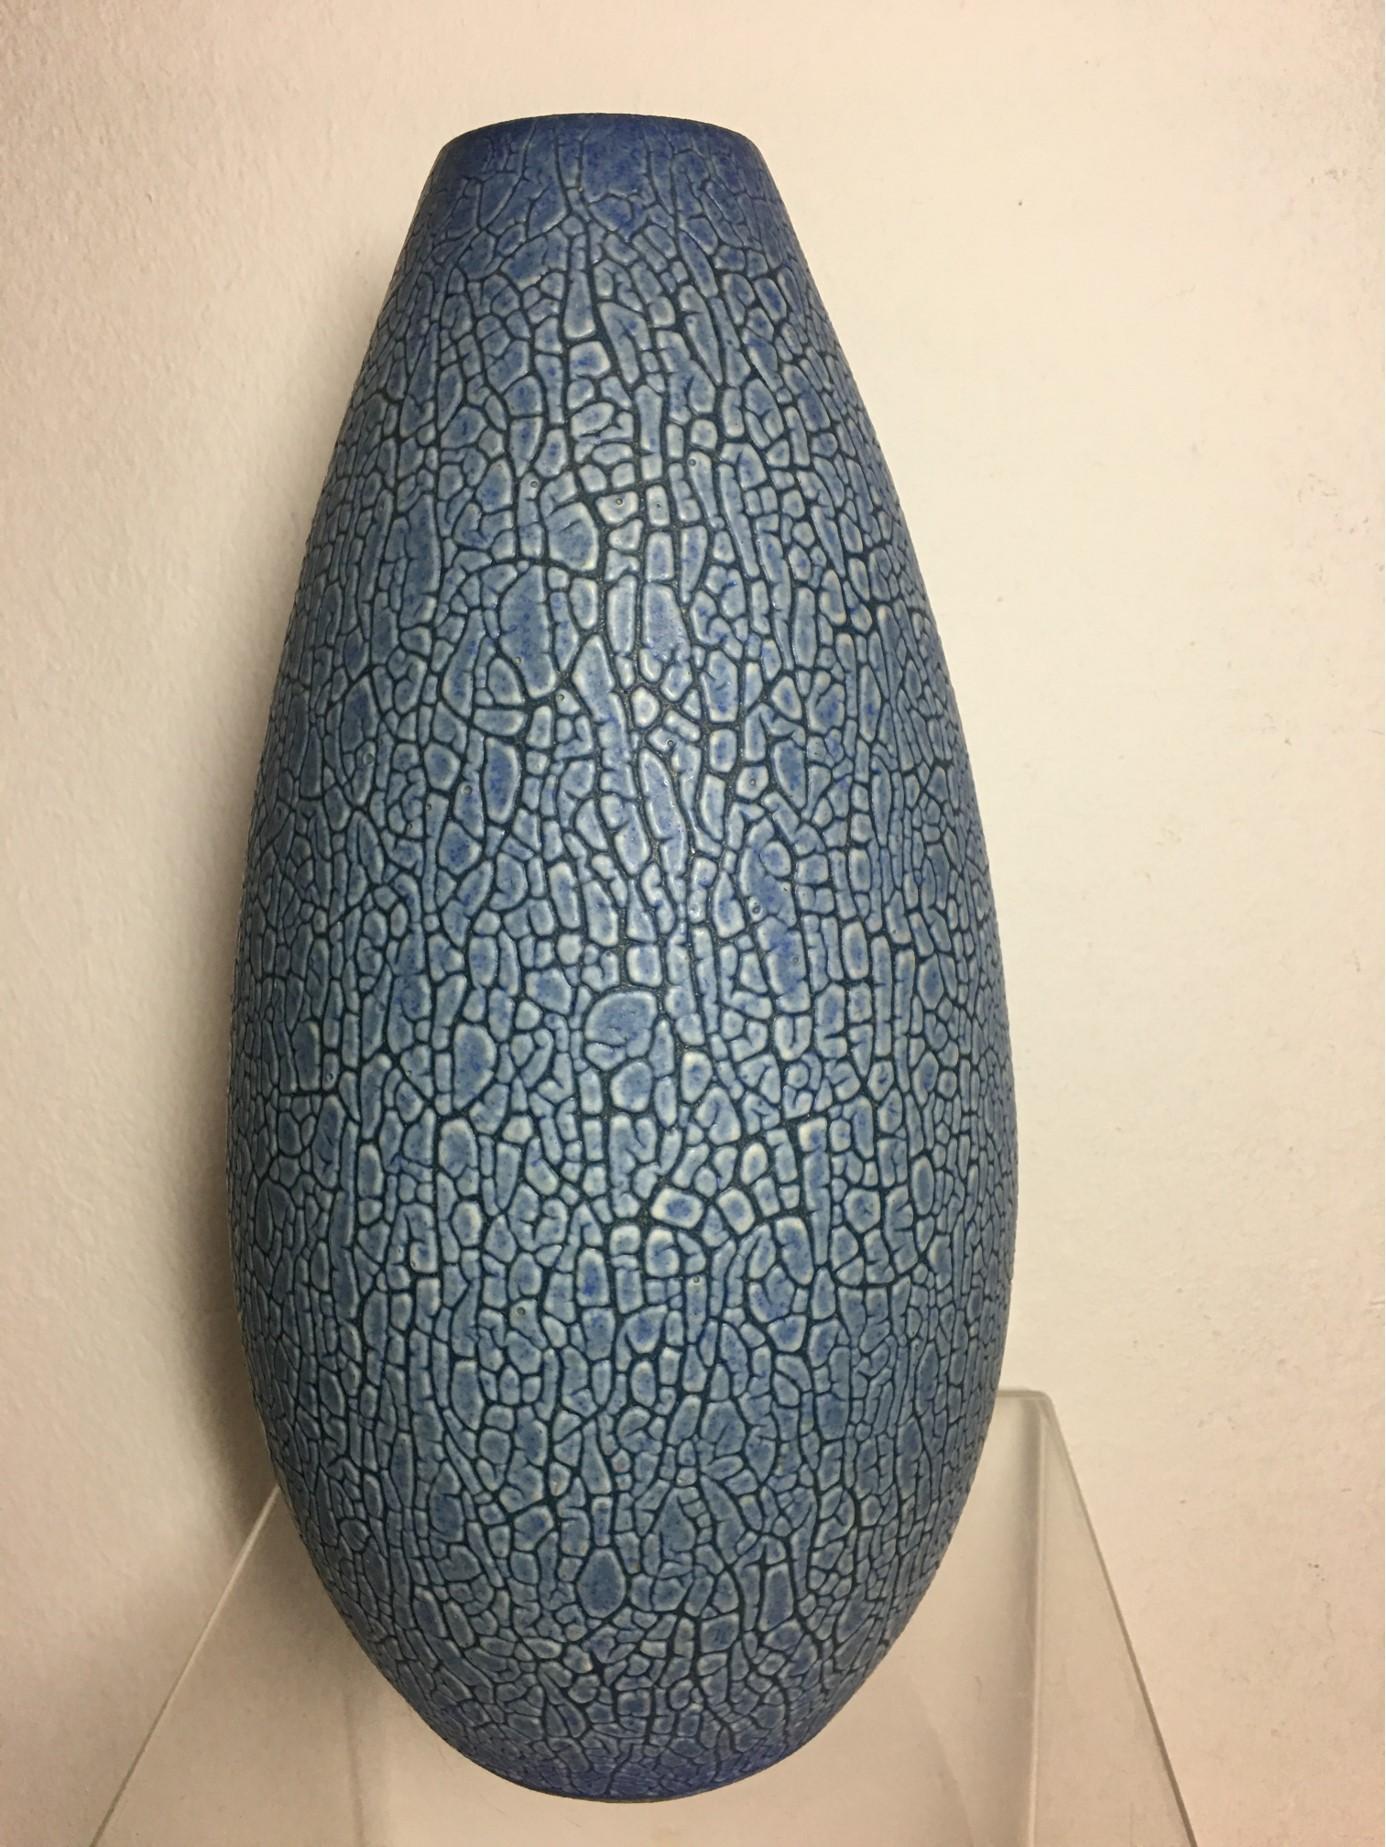 Mid-20th Century Reptile Skin Look Ceramic Vase from 1950s Germany For Sale